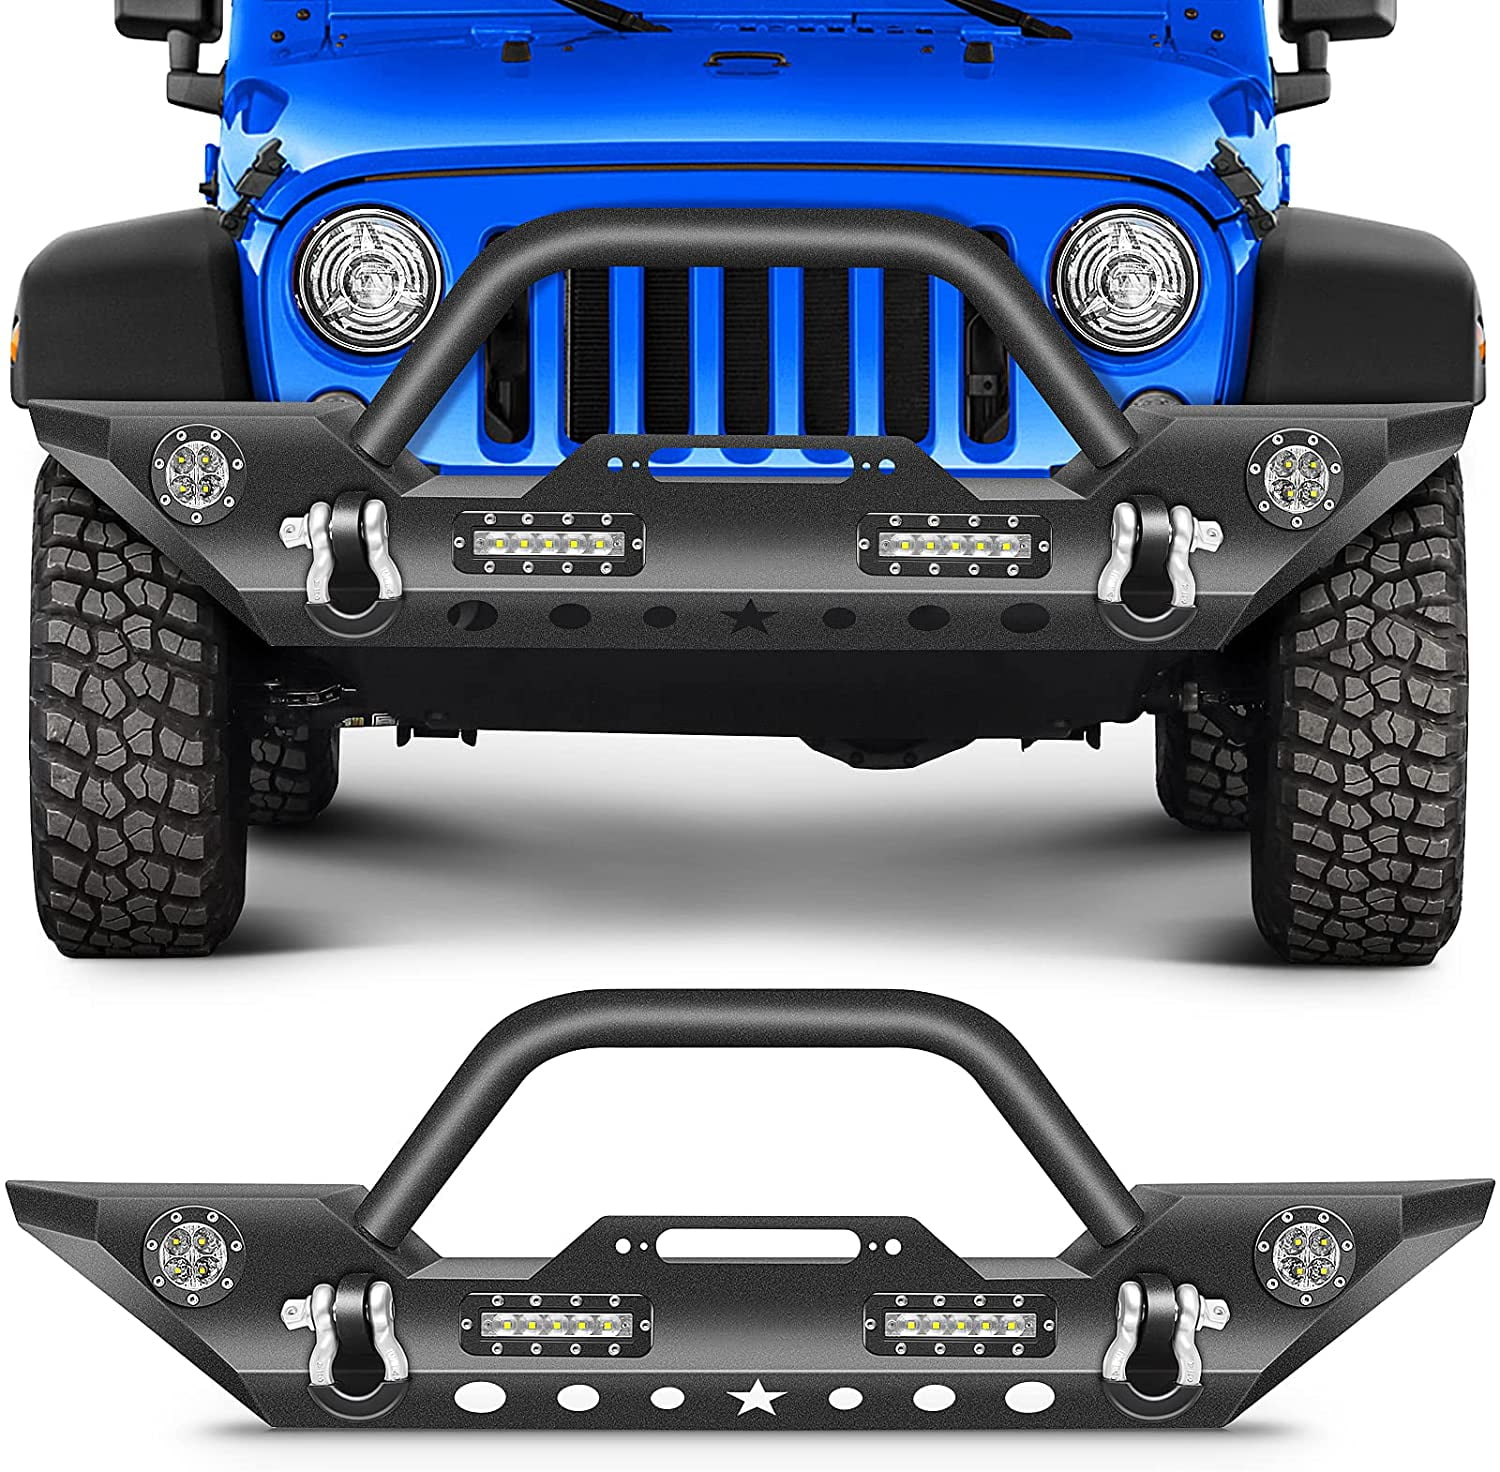 ECCPP Front Bumper Fit for 2007-2018 for Jeep Wrangler JK (with D-ring &  LED Lights & Winch Plate ) Texture Black 